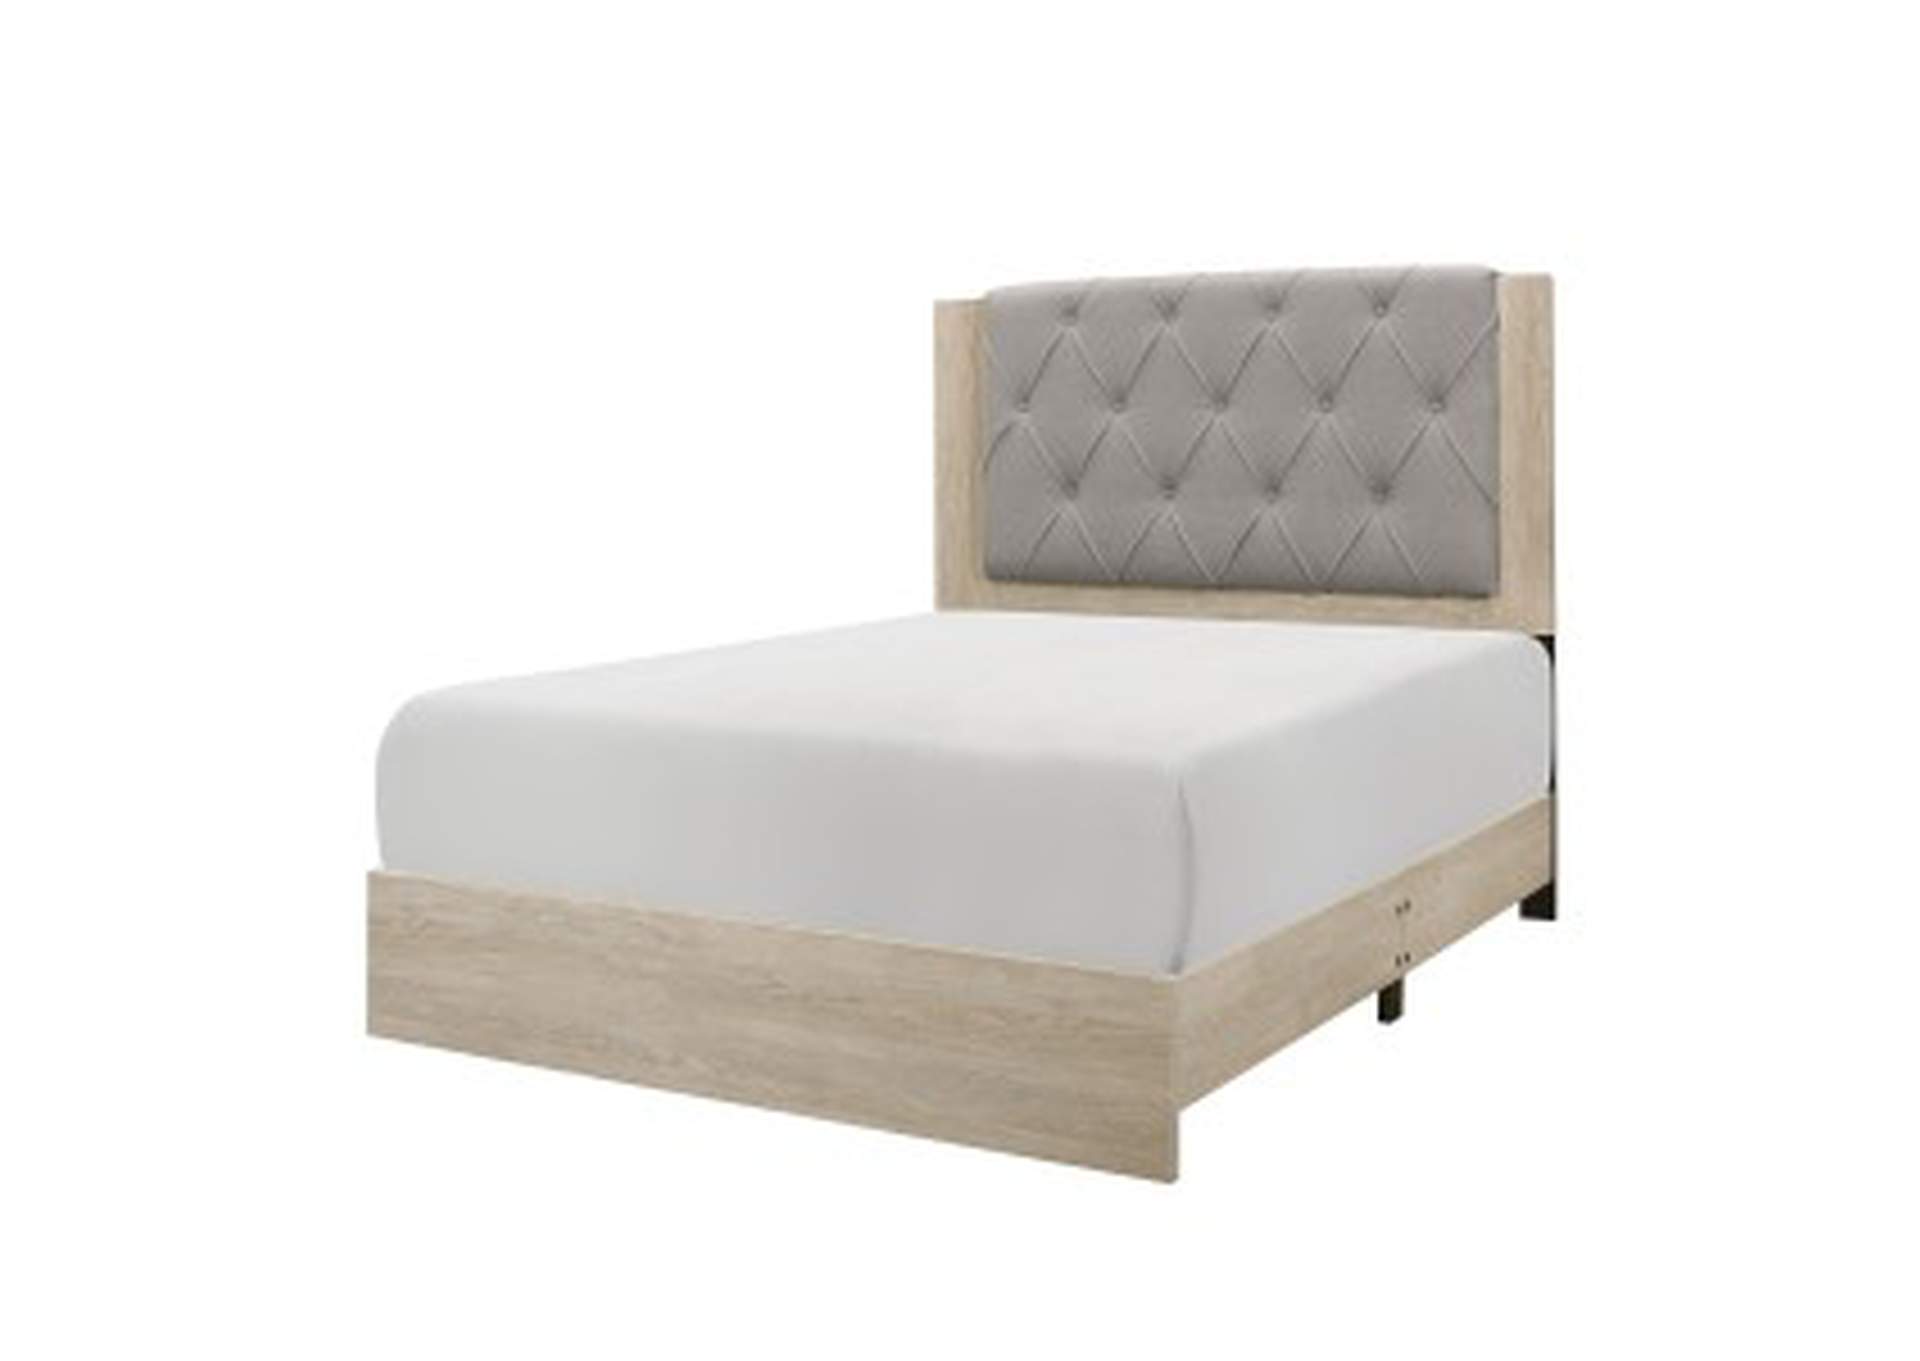 Whiting Queen Bed In A Box,Homelegance